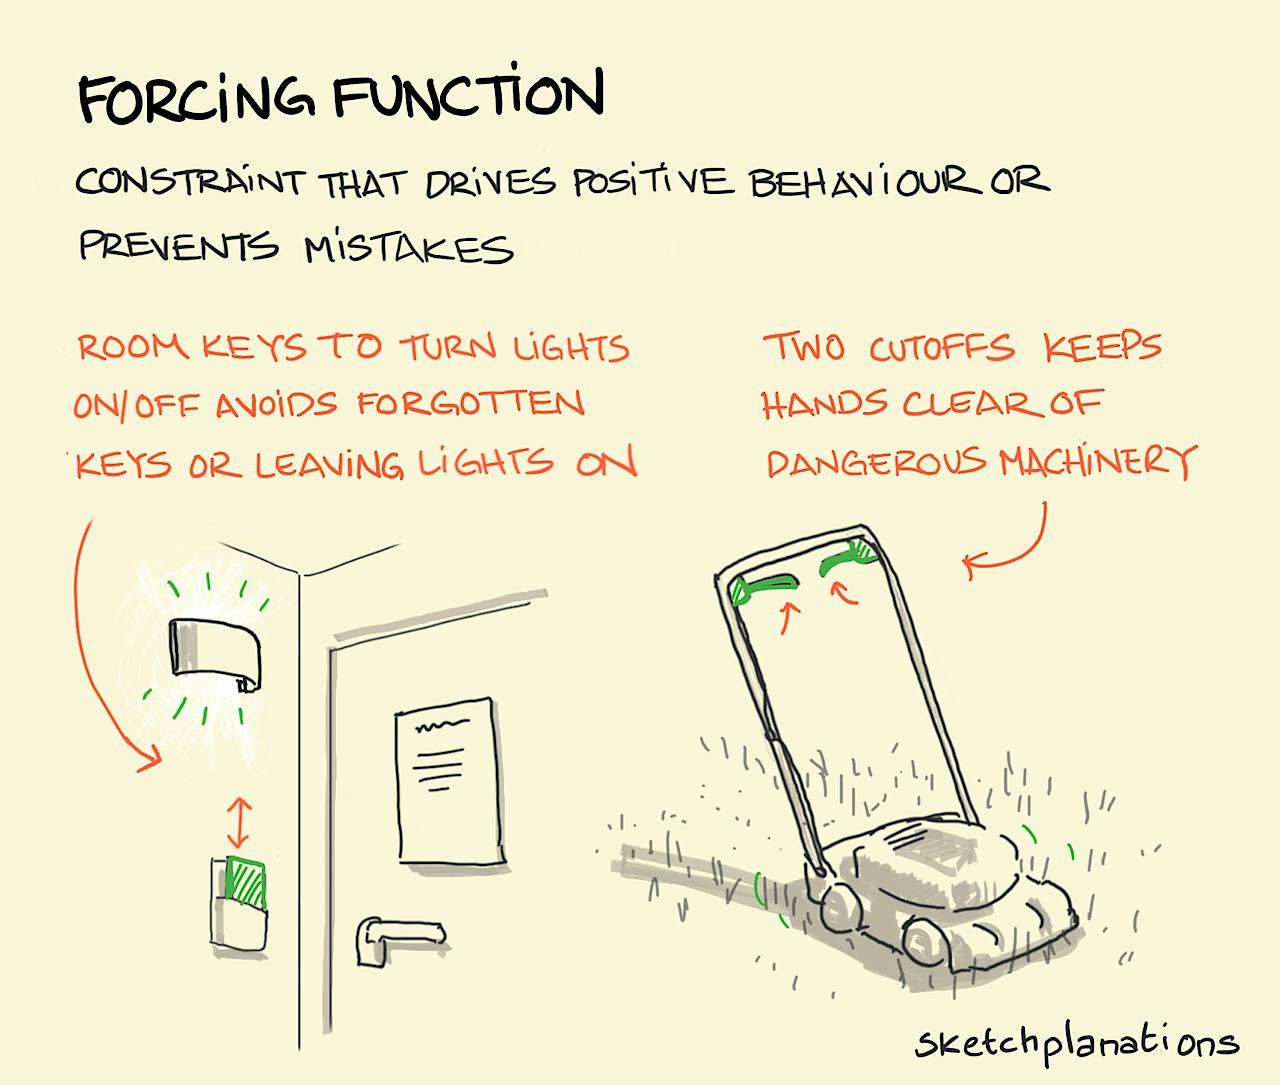 Forcing functions in design - 2 examples: a hotel room with the lights controlled by key card and a lawnmower that needs both hands to turn it on